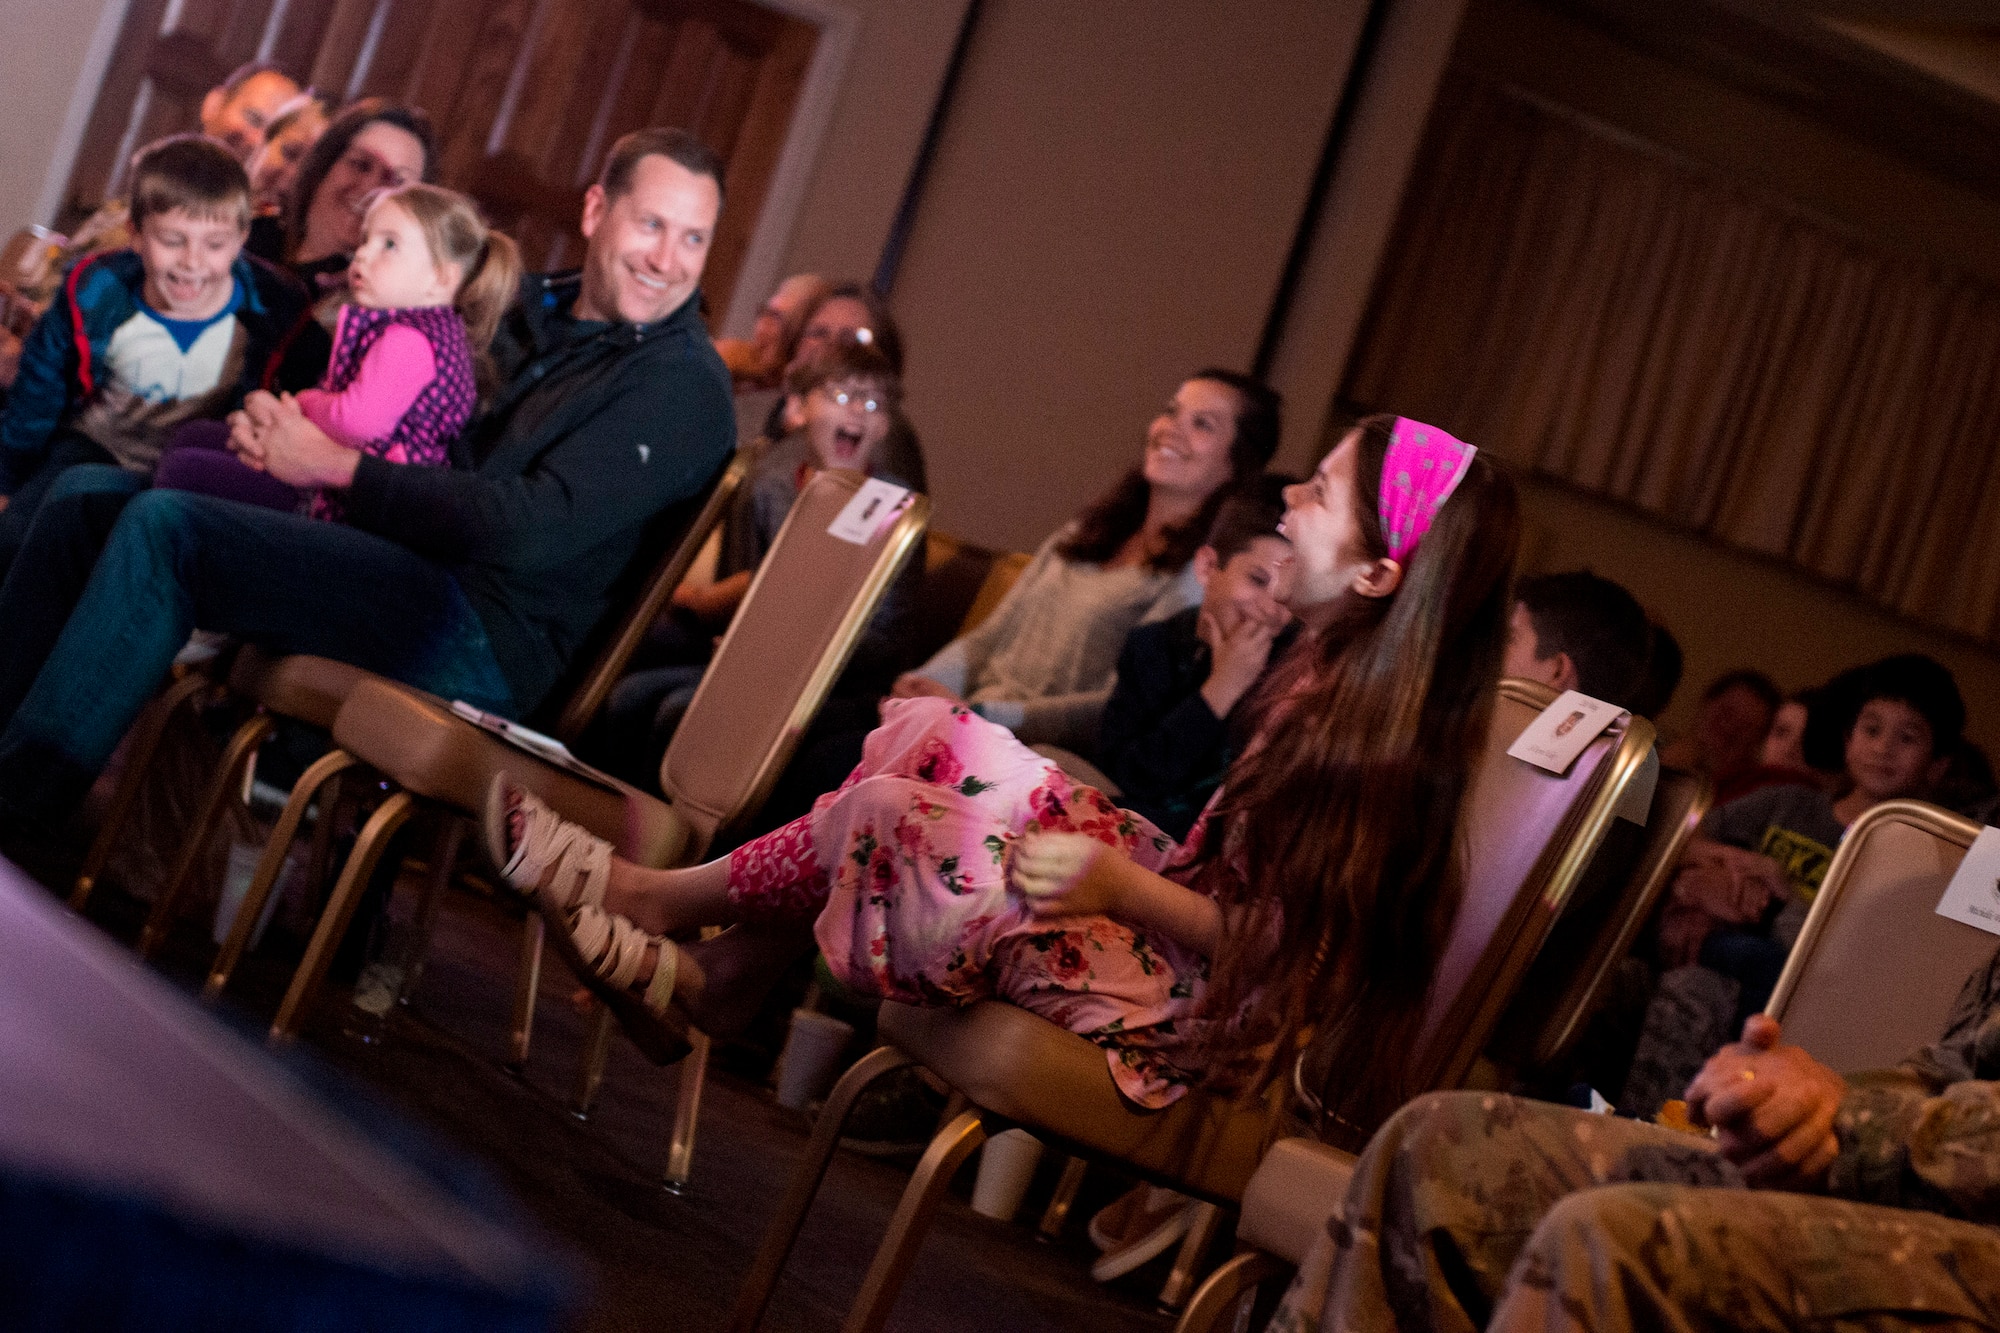 Audience members laugh at a joke performed by Ryan Bomgardner, ventriloquist, during his comedy show, March 15, 2018, at Moody Air Force Base, Ga. Air Force Entertainment provided this opportunity for Airmen to attend as a family to enjoy some time away from the mission. Bomgardner is a full-time ventriloquist and comedian who performs over 140 shows annually throughout North America. (U.S. Air Force photo by Airman 1st Class Erick Requadt)